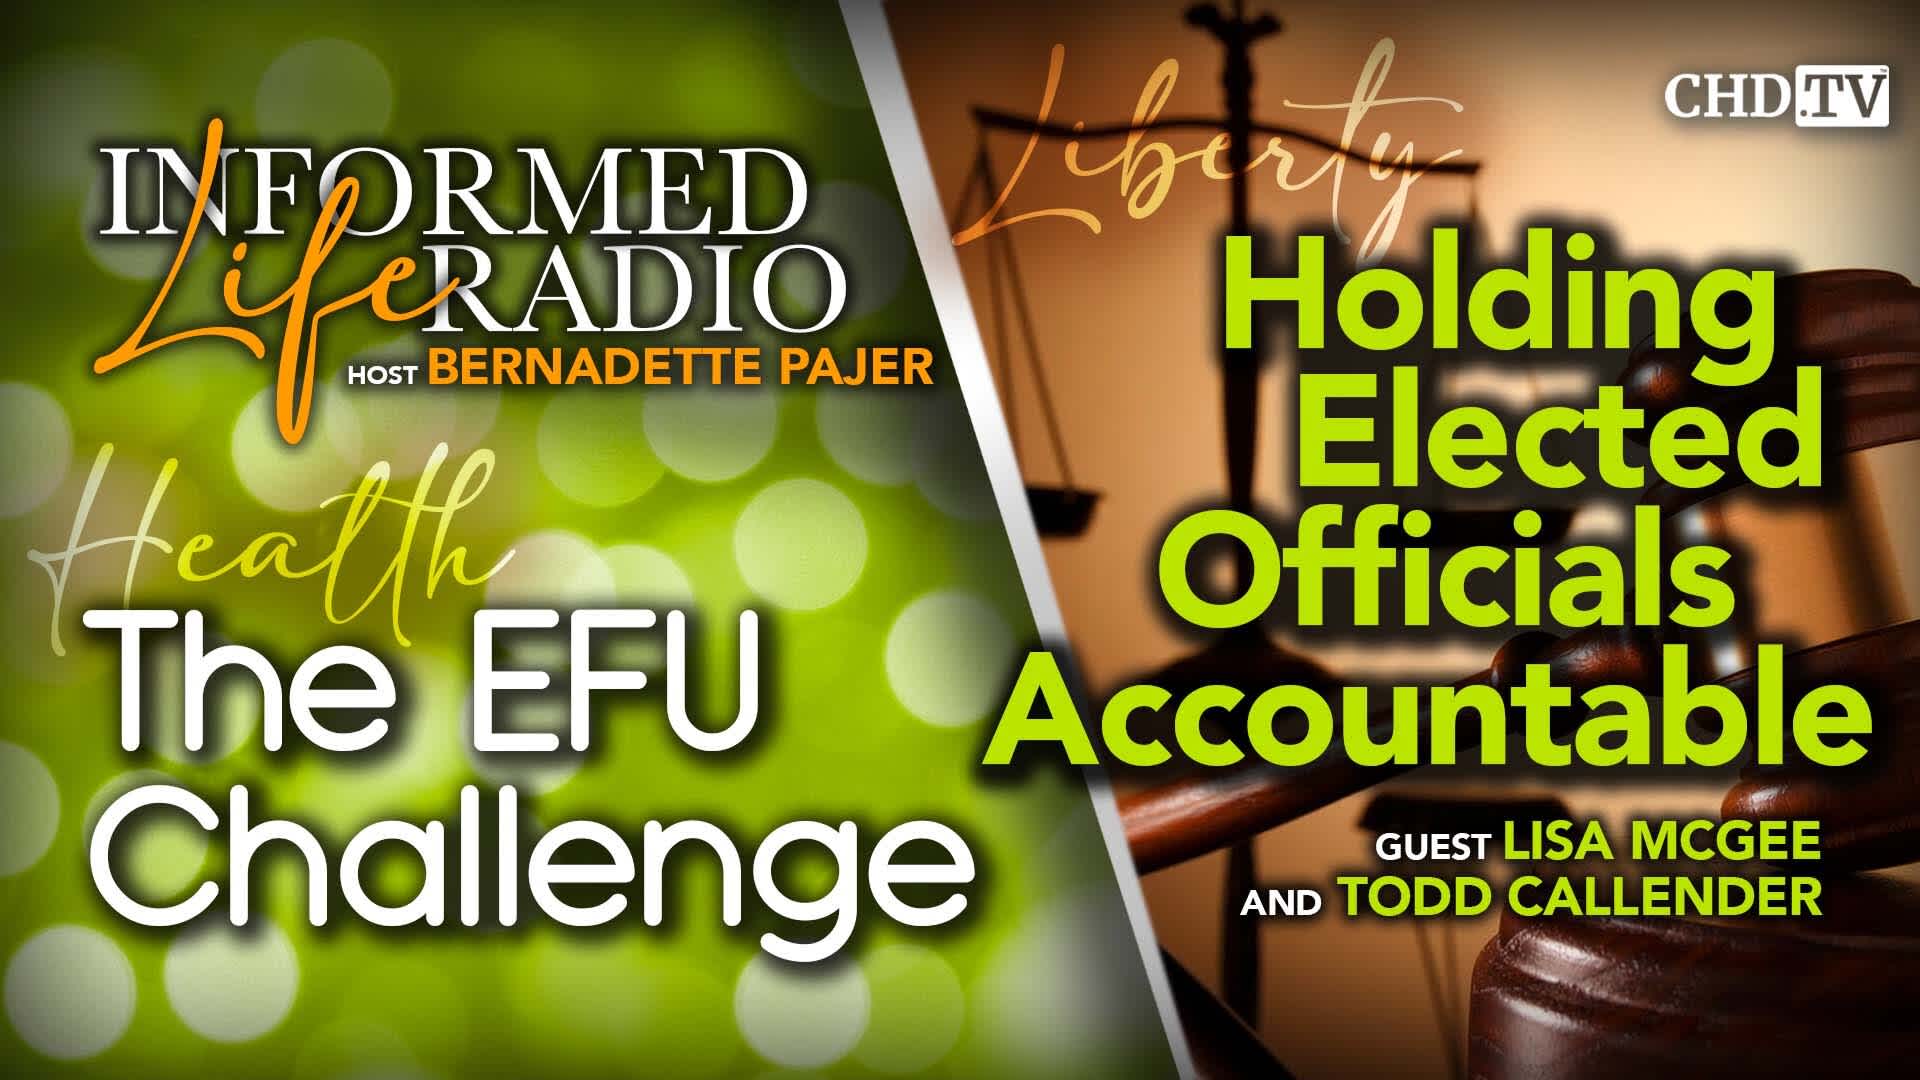 The EFU Challenge + Holding Elected Officials Accountable